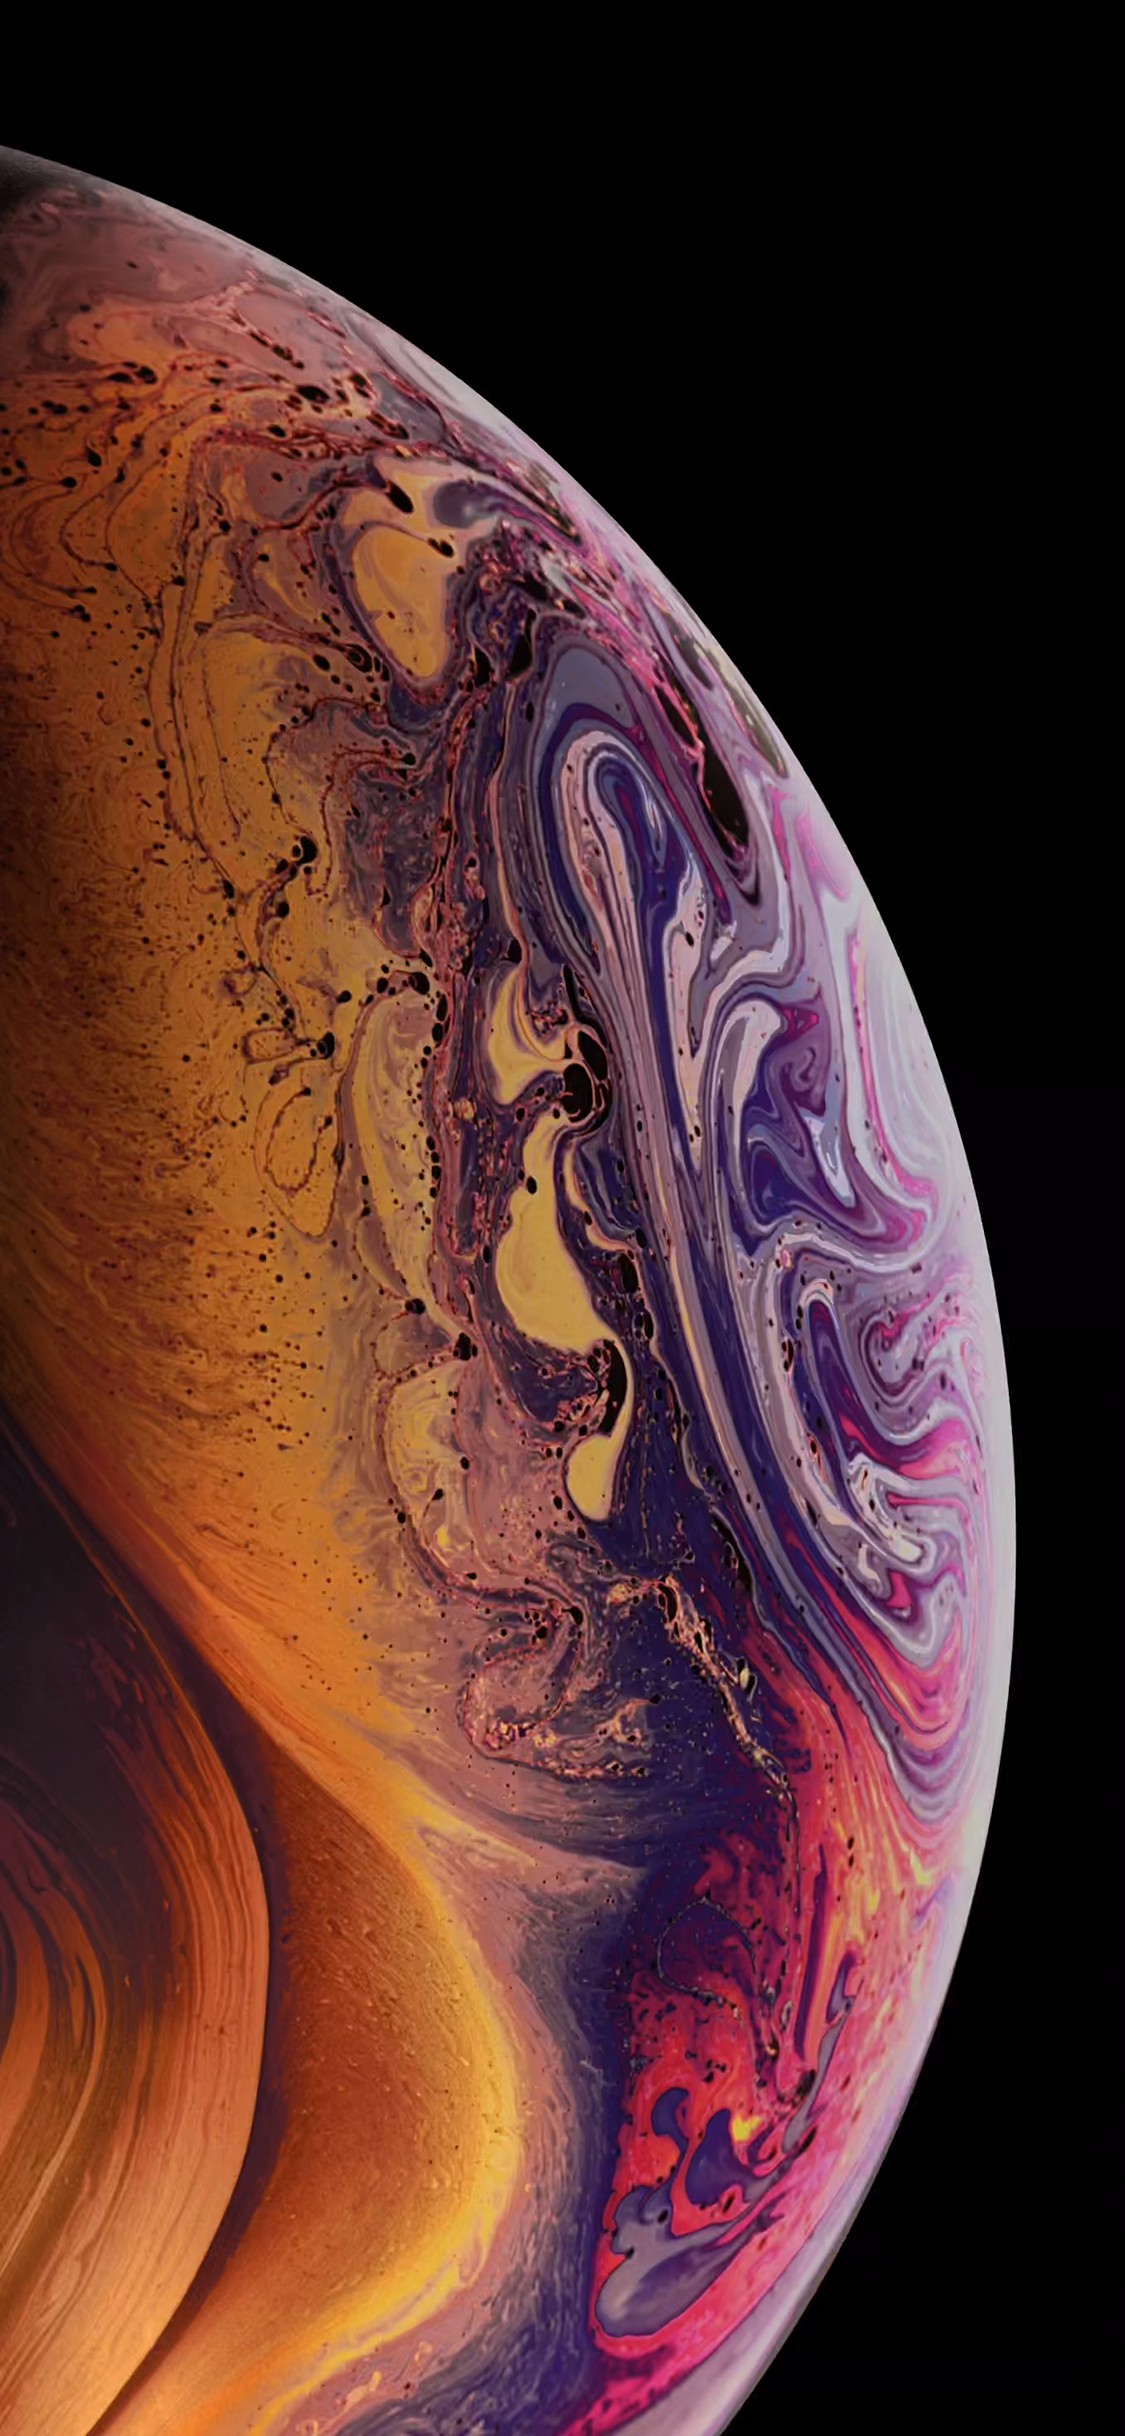 iPhone XS Wallpaper in HD With high-resolution 1125X2436 pixel. You can set as wallpaper for Apple iPhone X, XS Max, XR, 8, 7, 6, SE, iPad. Enjoy and share your favorite HD wallpapers and background images